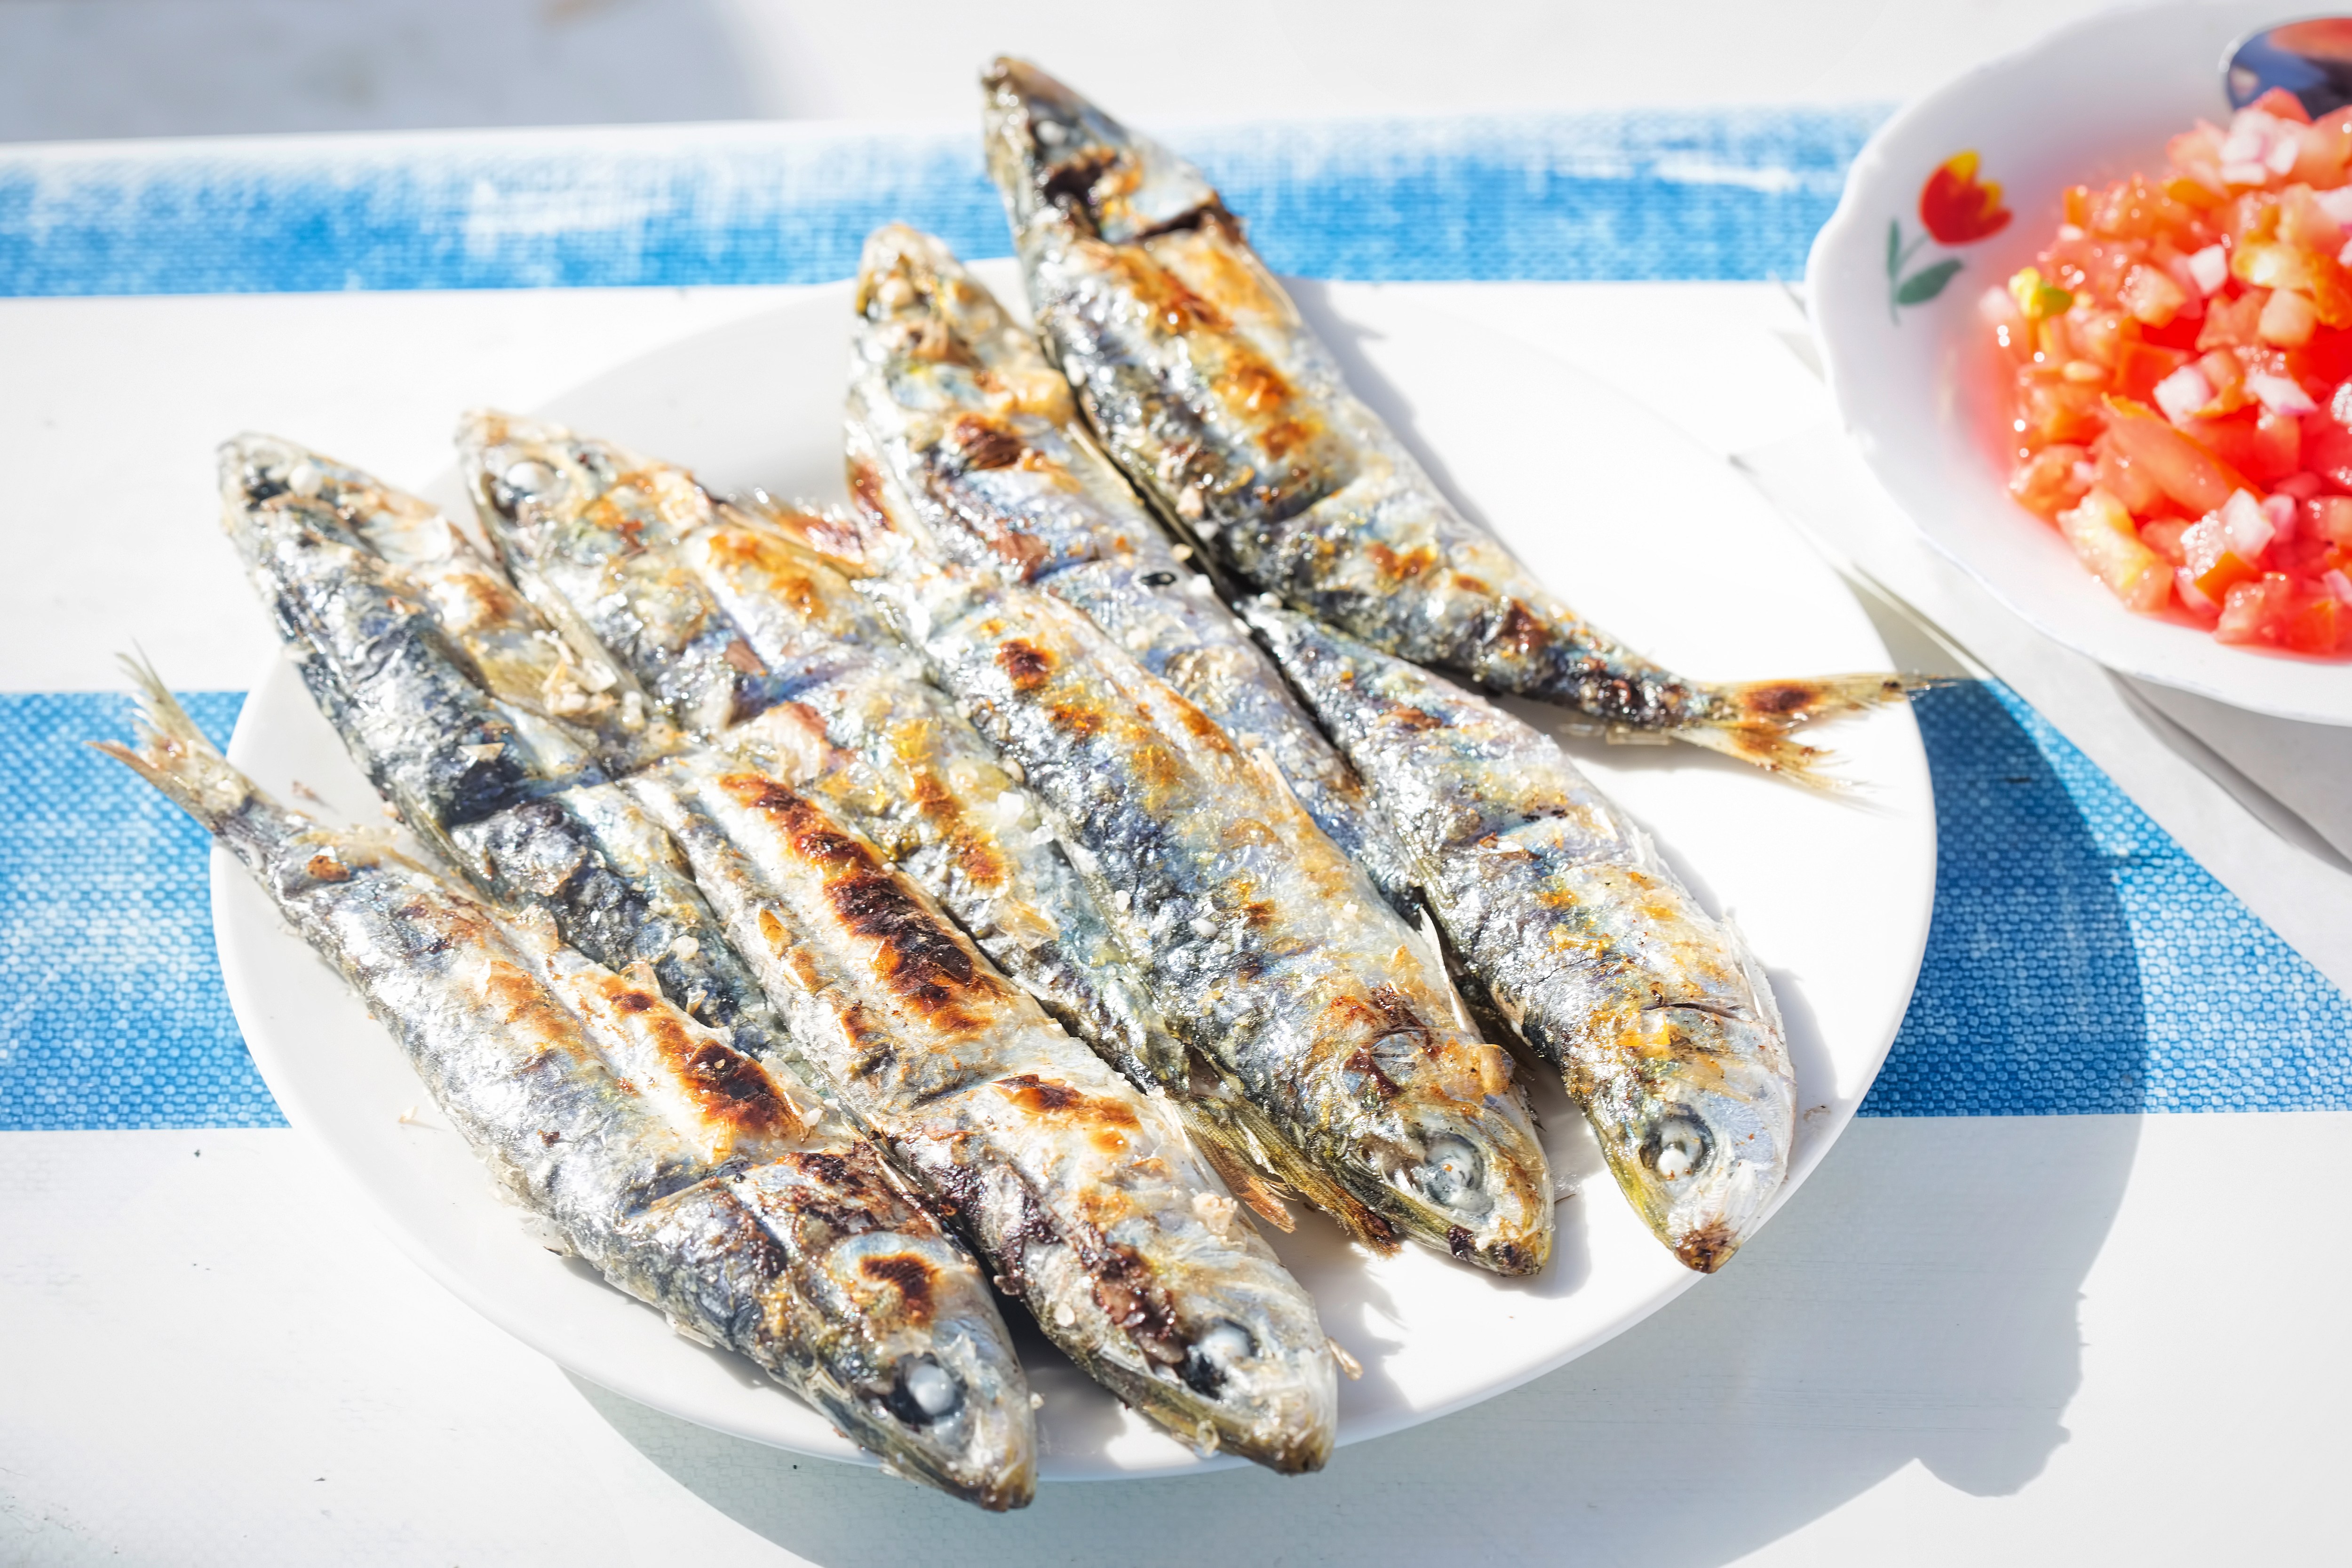 Grilled sardines are Agadir’s speciality